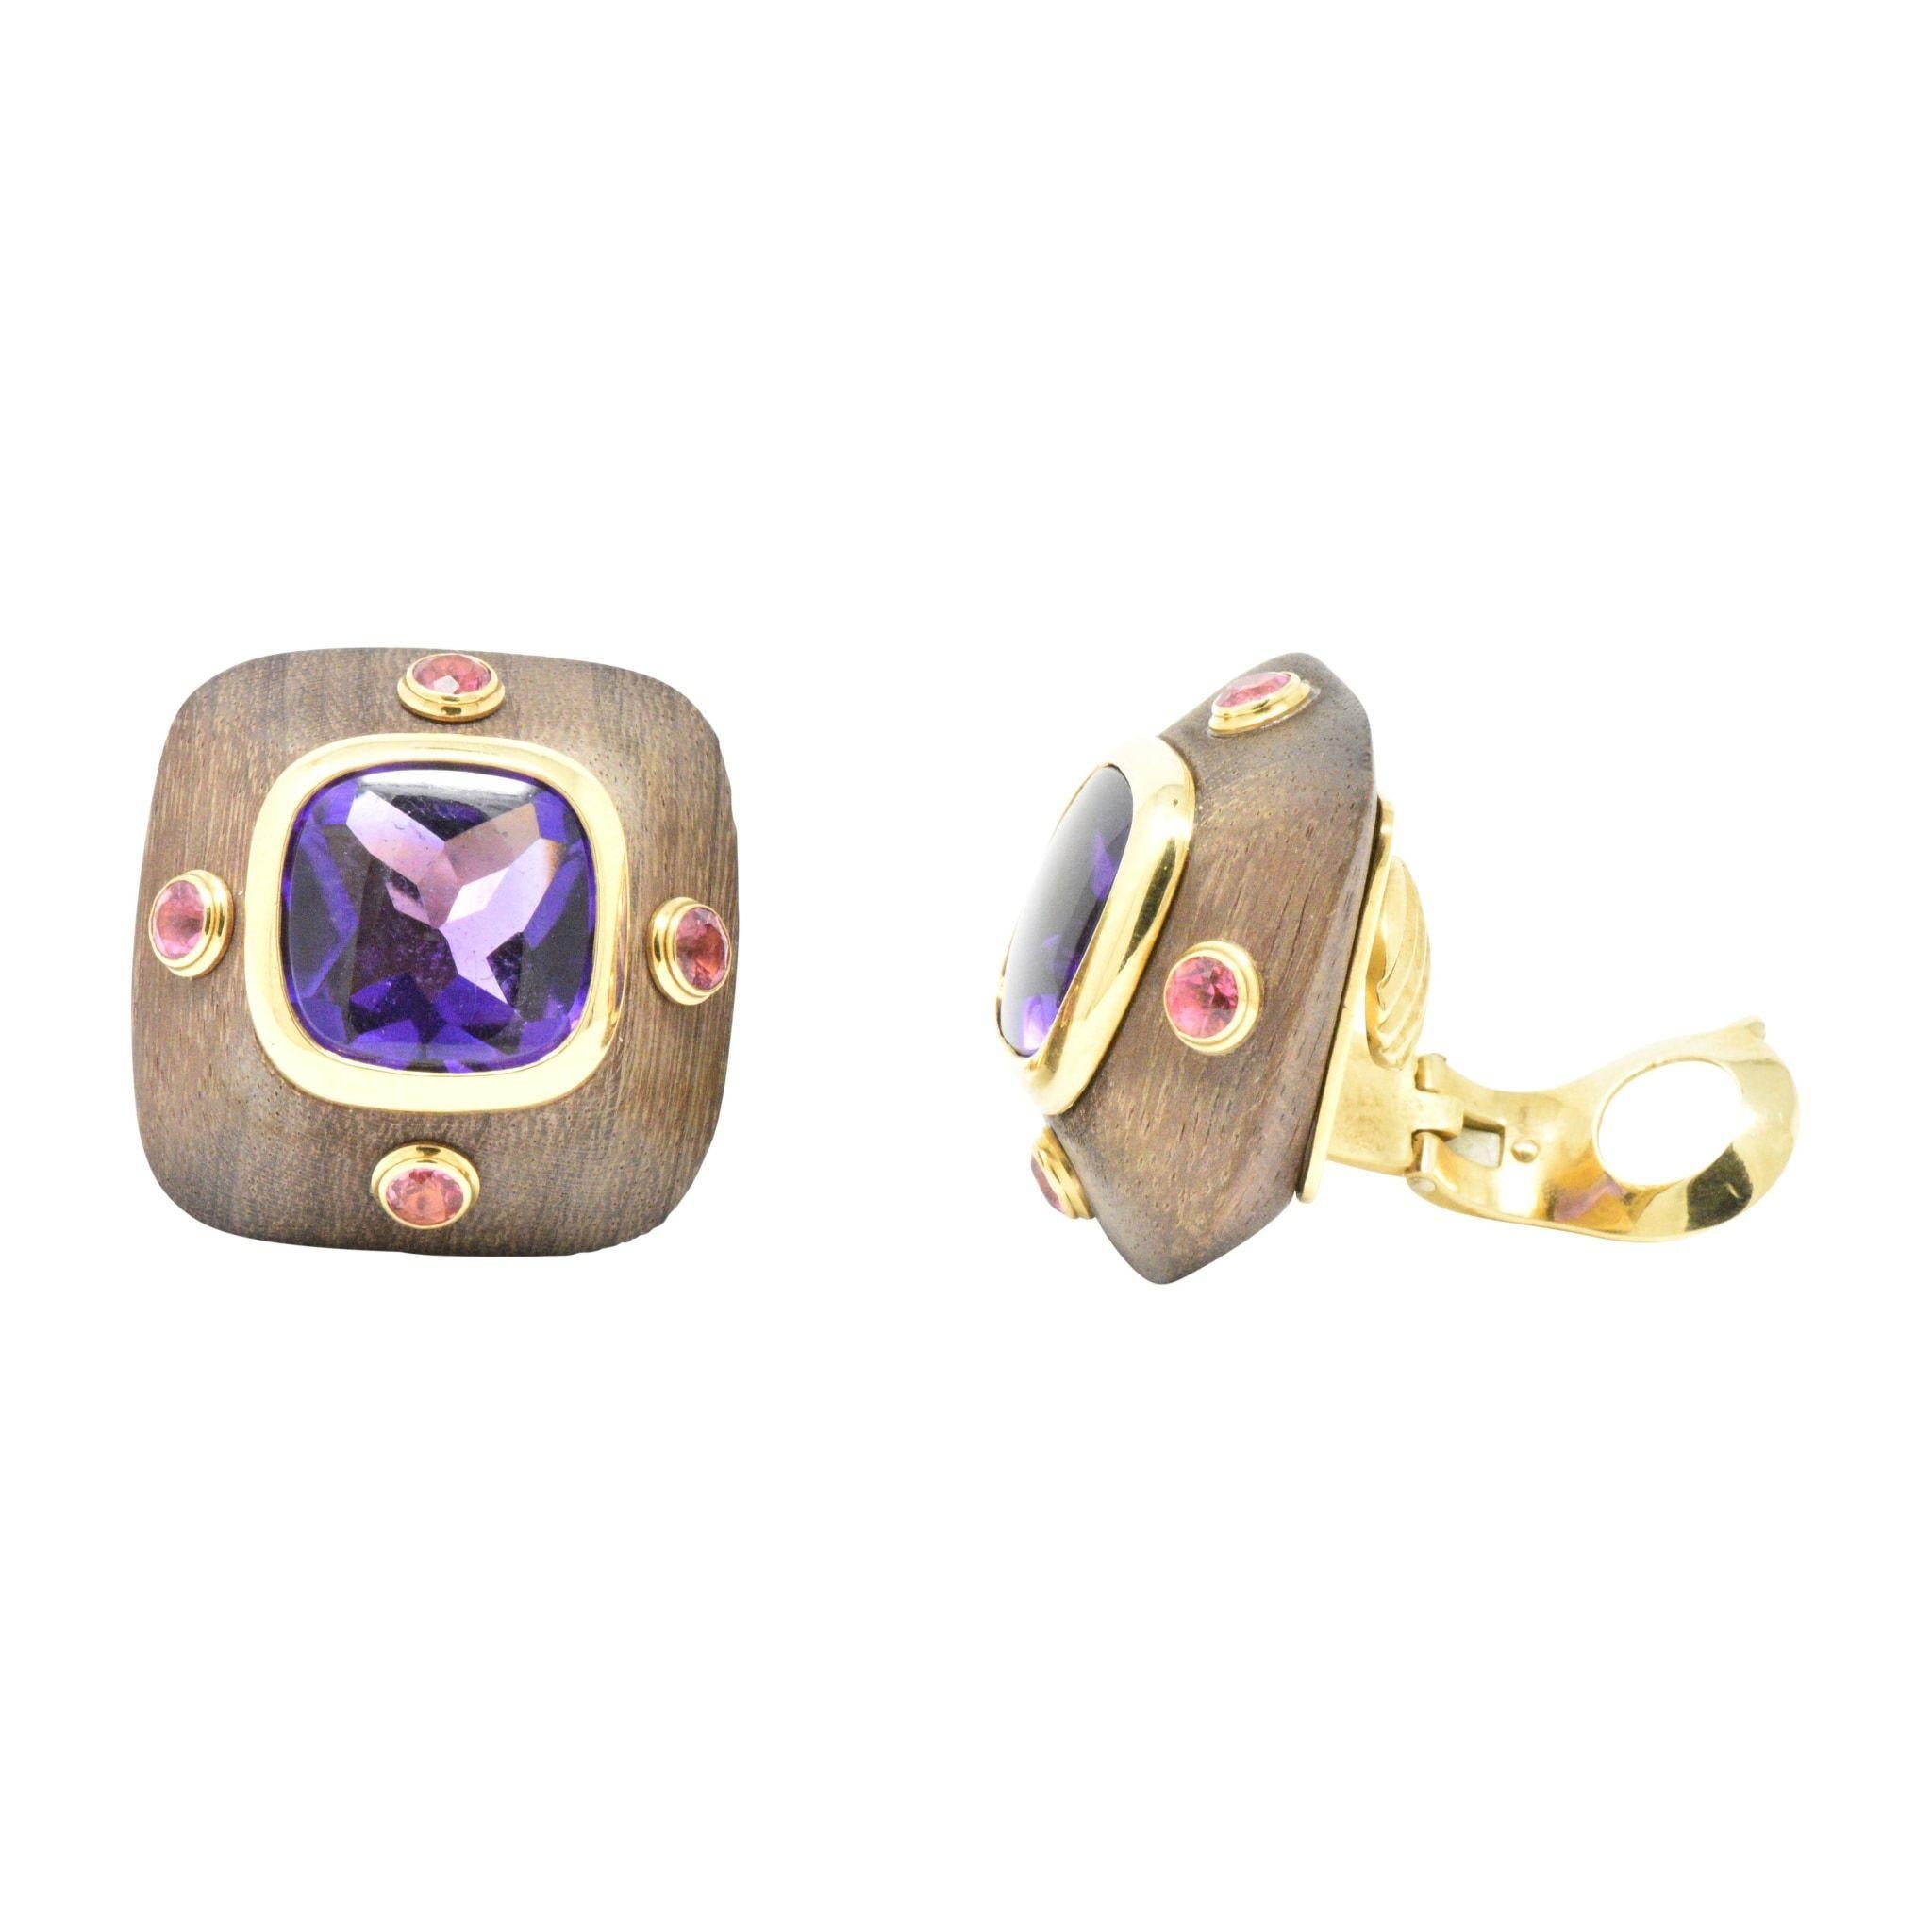 18kt Gold, Wood, Amethyst, and Pink Tourmaline Earclips, Van Cleef & Arpels, France, with cushion-shape buff-top amethysts framed by circular-cut pink tourmalines, larger 1 1/4 in., each no. B3559, and NY3K937.9, NY3K937.12, maker's marks and